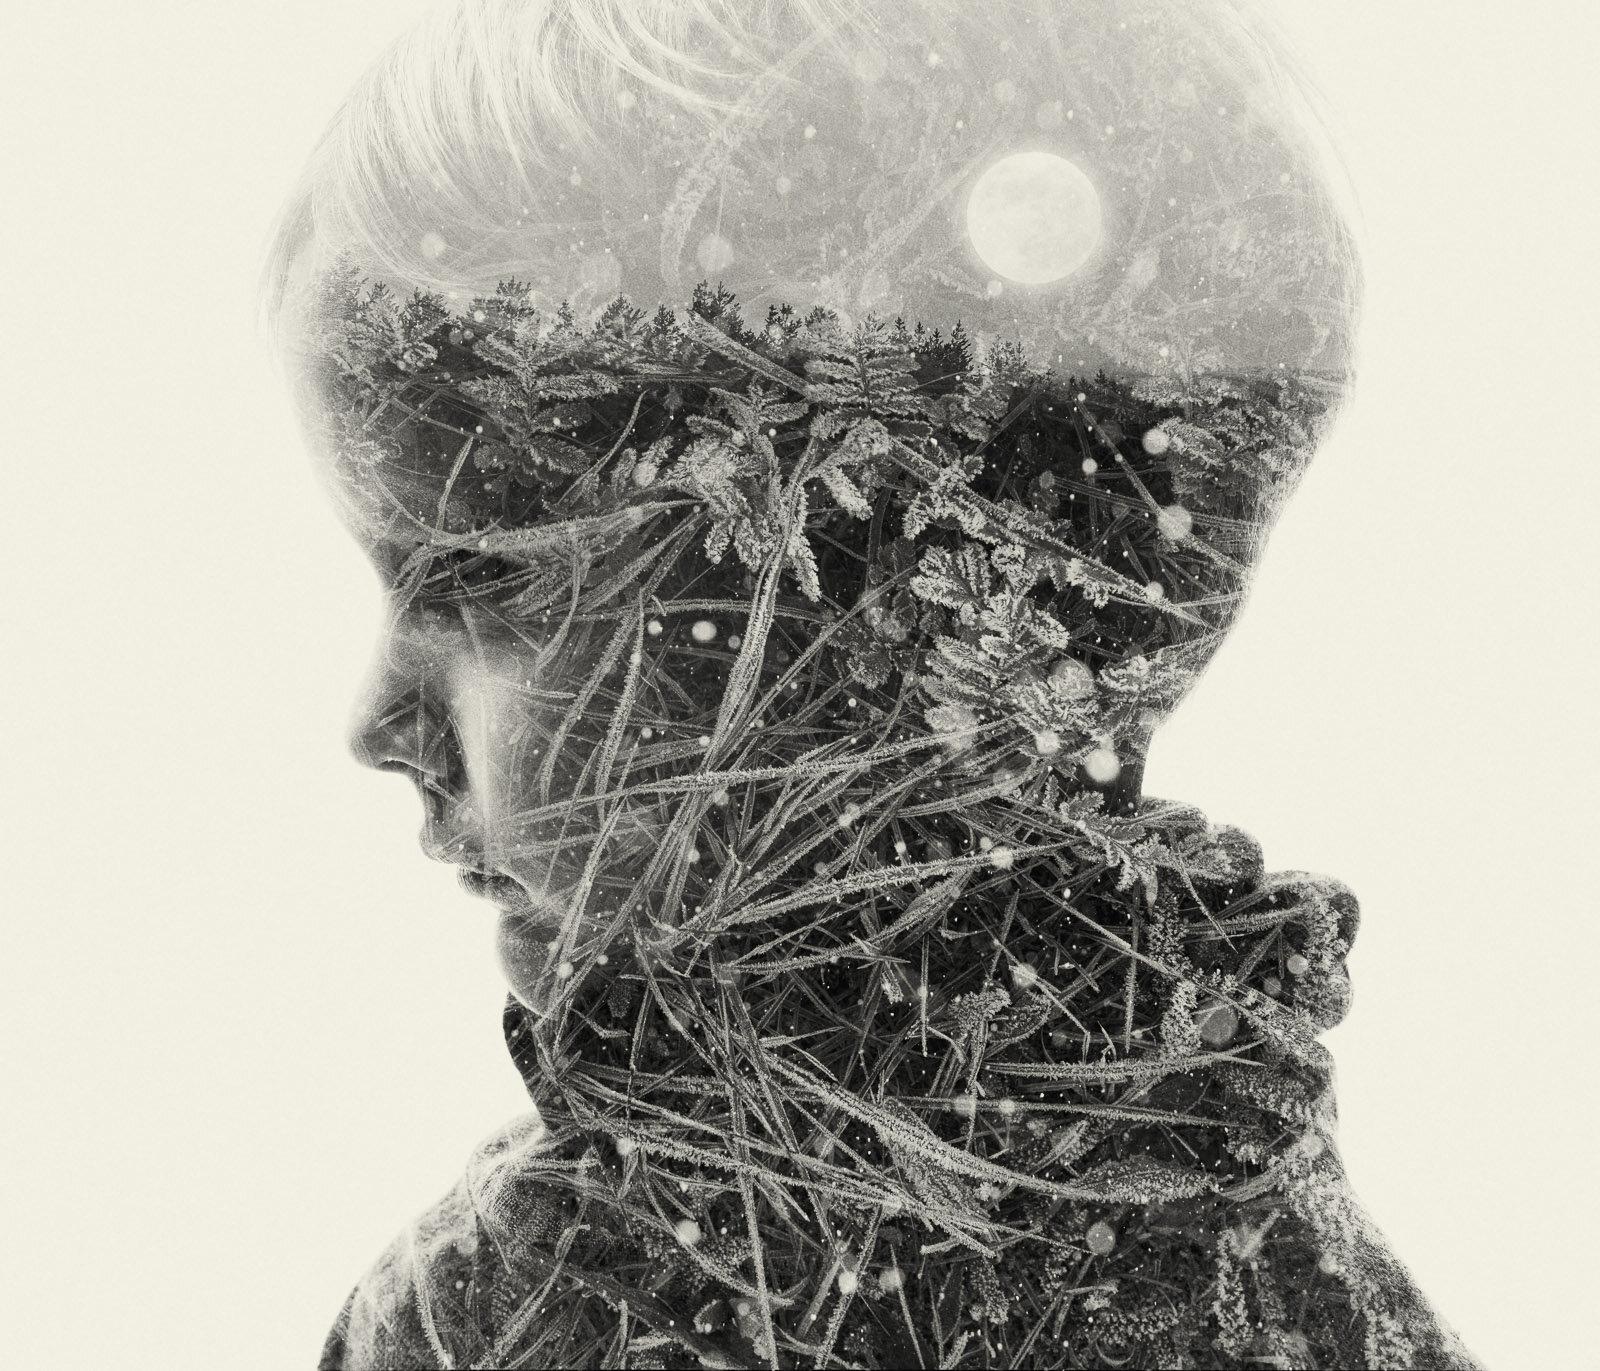 Moon child - black and white portrait and nature multi exposure photograph